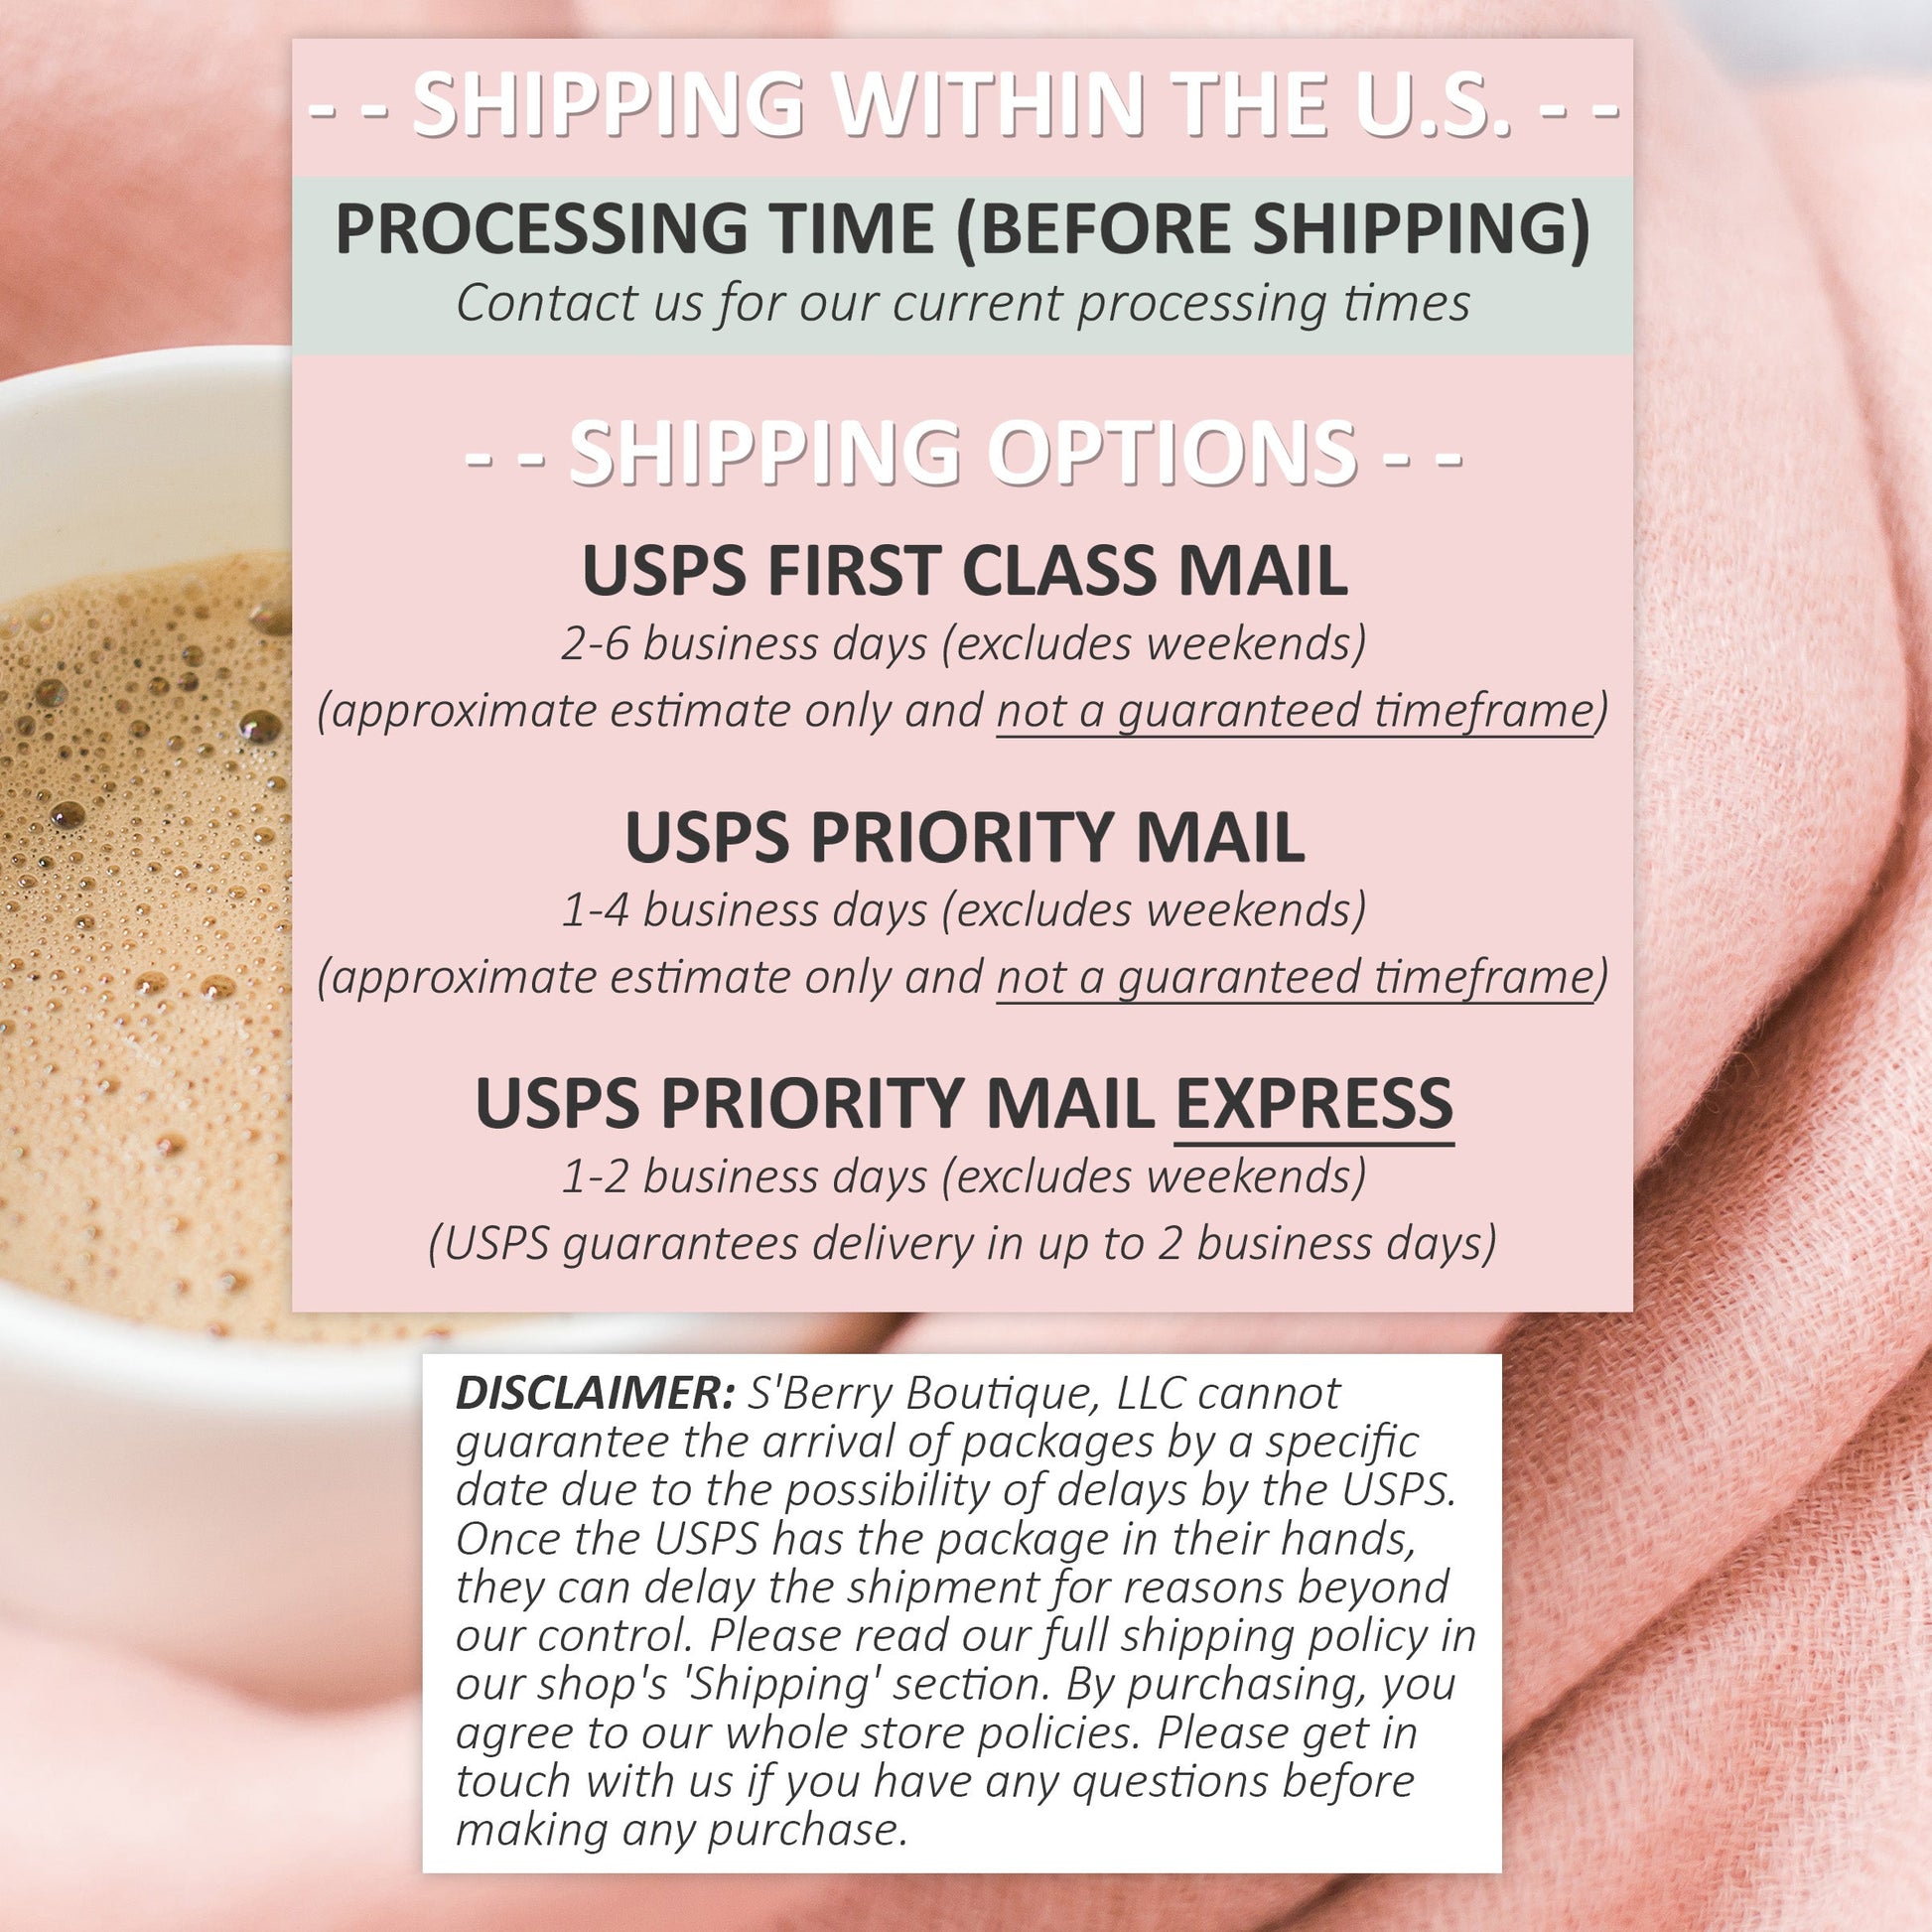 Shipping Disclaimer - S'Berry Boutique, LLC